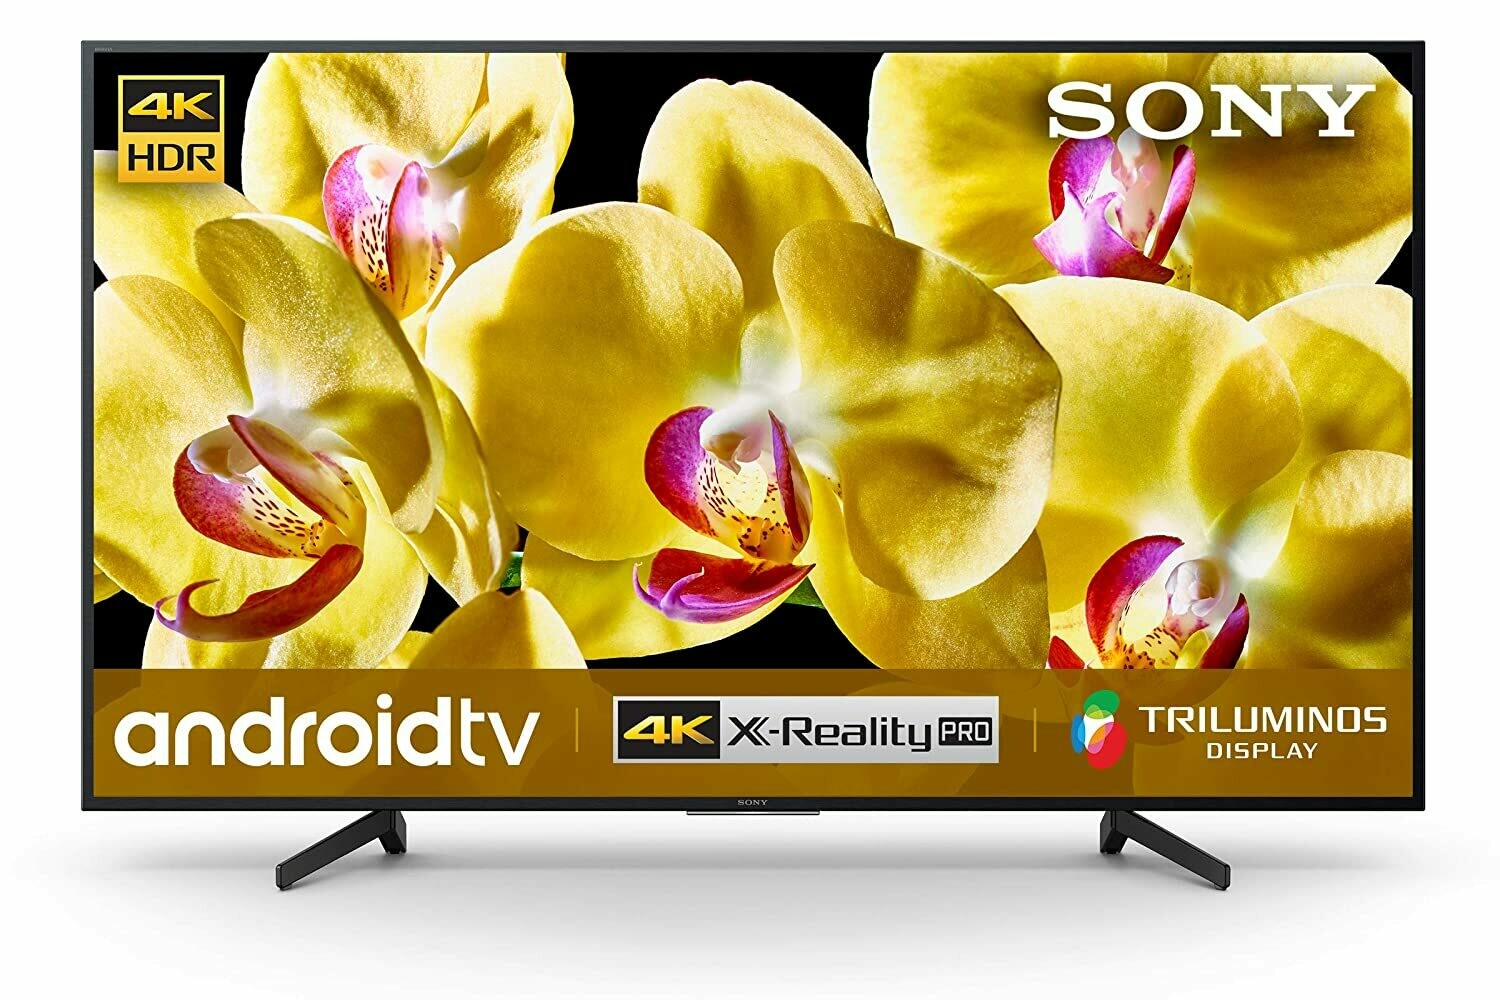 Sony Bravia 189 cm (75 inches) 4K UHD Certified Android LED TV KD-75X8000G